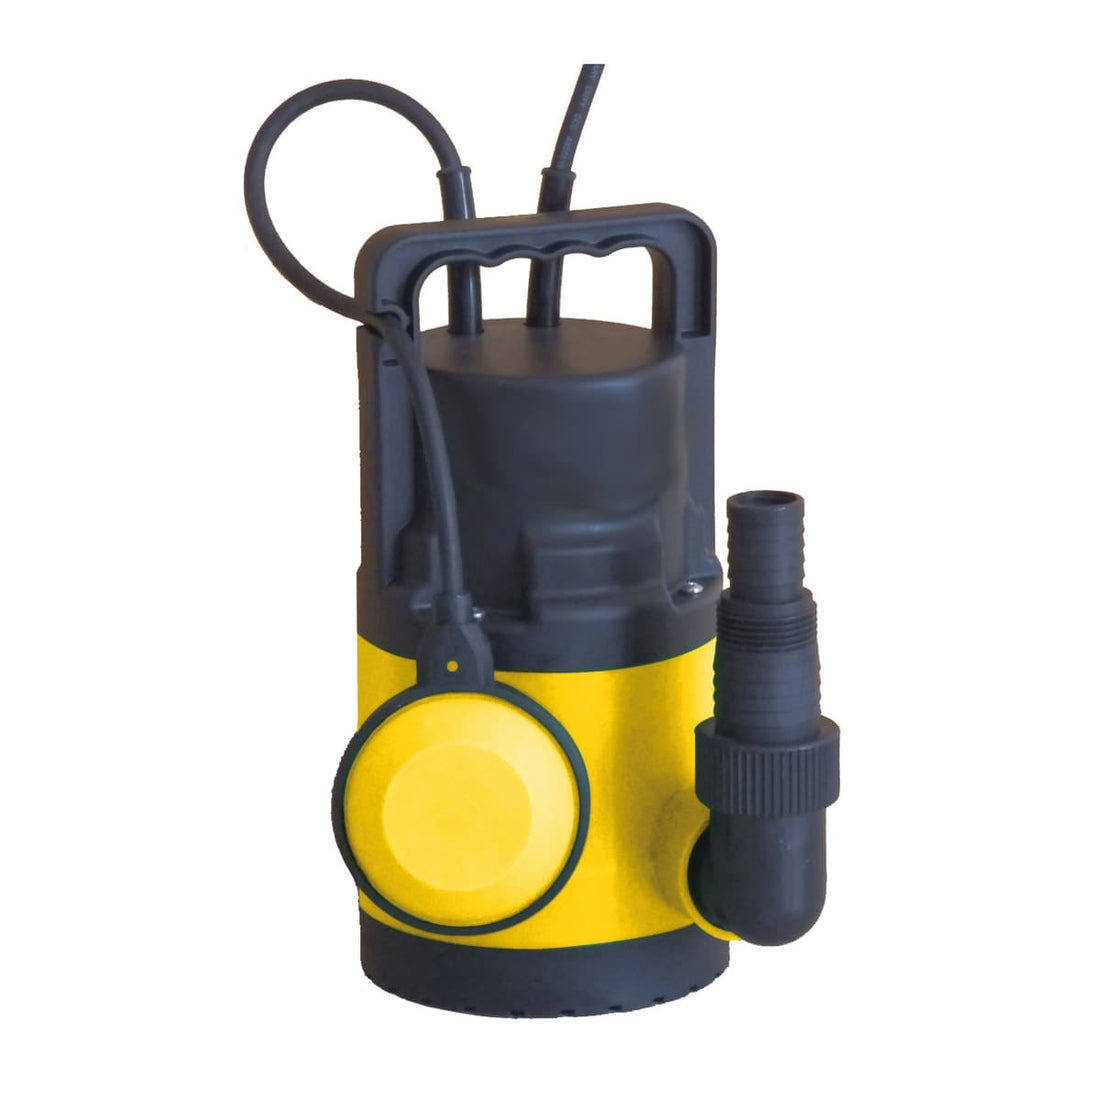 SUBMERSIBLE CLEAR WATER PUMP 250W - best price from Maltashopper.com BR500460127